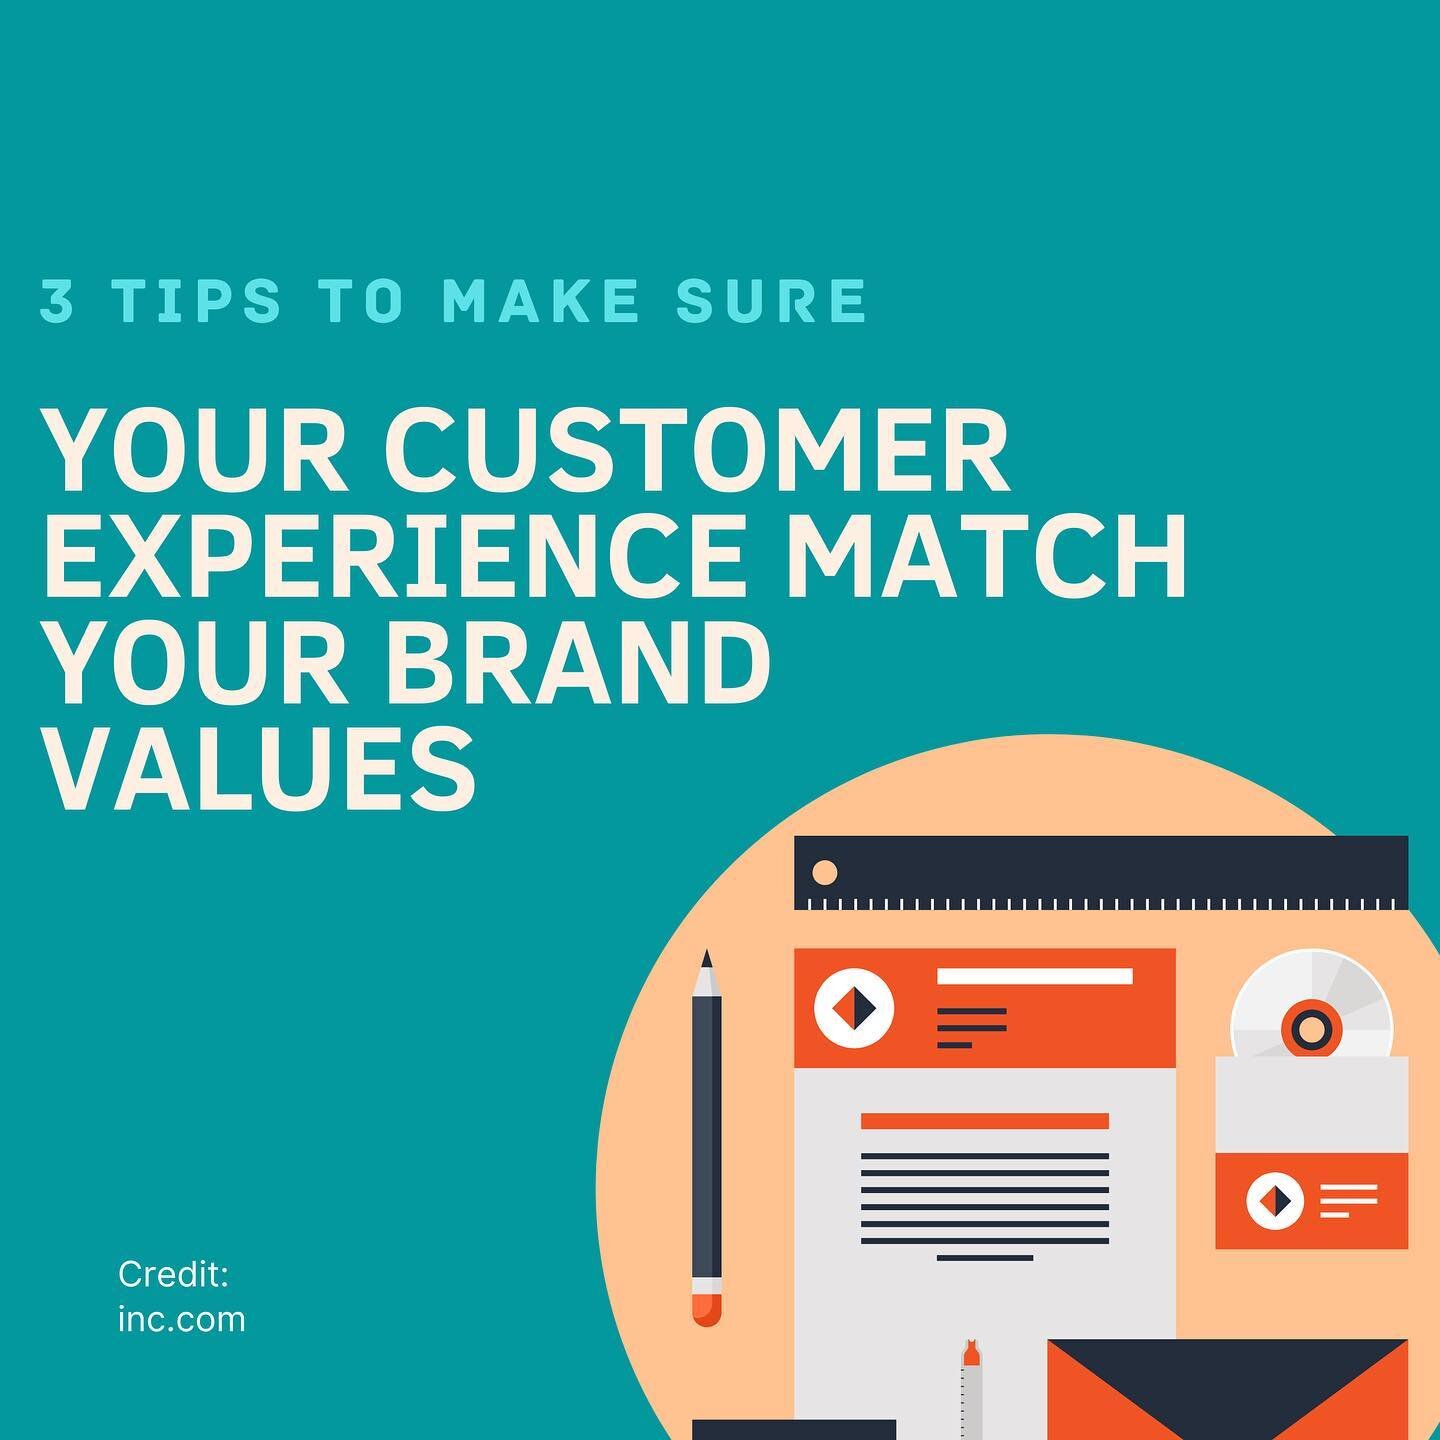 Don't lead customers in the wrong direction. It's important that your customer's experience and your brand's values match up!

Credit: https://www.inc.com/sonia-thompson/why-so-many-brand-promises-arent-true.html

#Brandsformation #BrandKamp #marketi